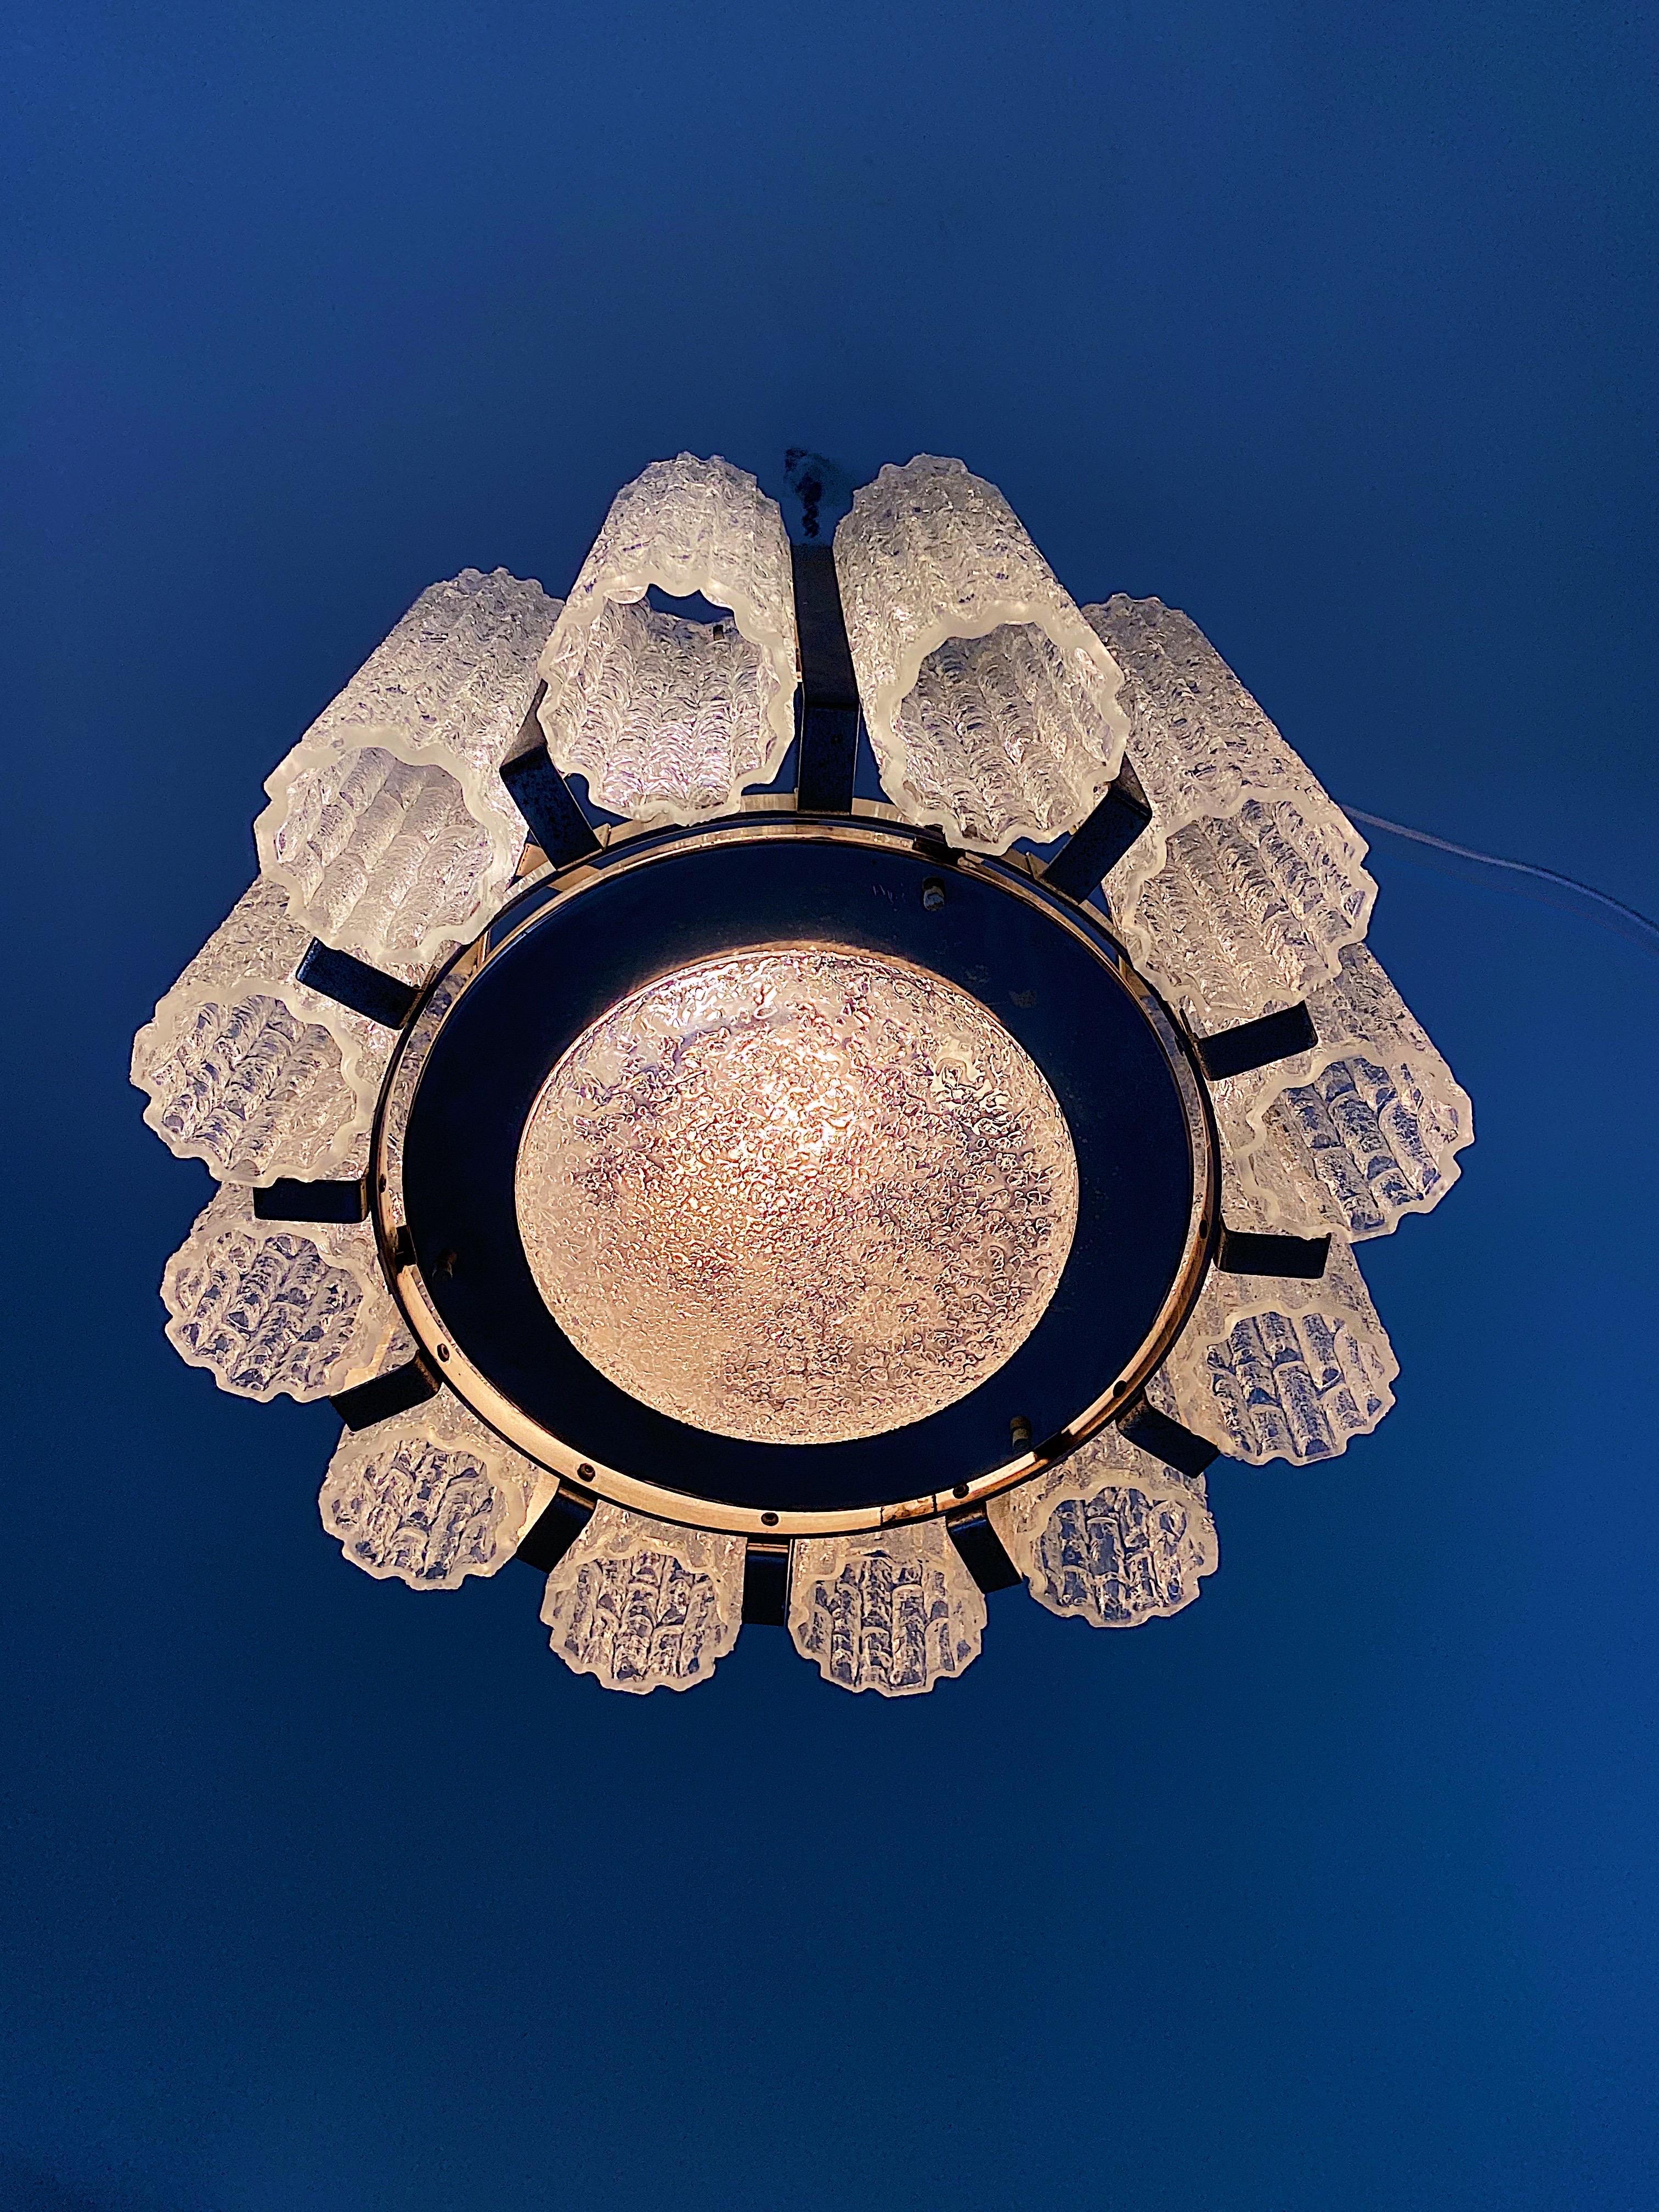 Mid-Century Modern Murano Glass Chandelier by Barovier e Toso, 1960s For Sale